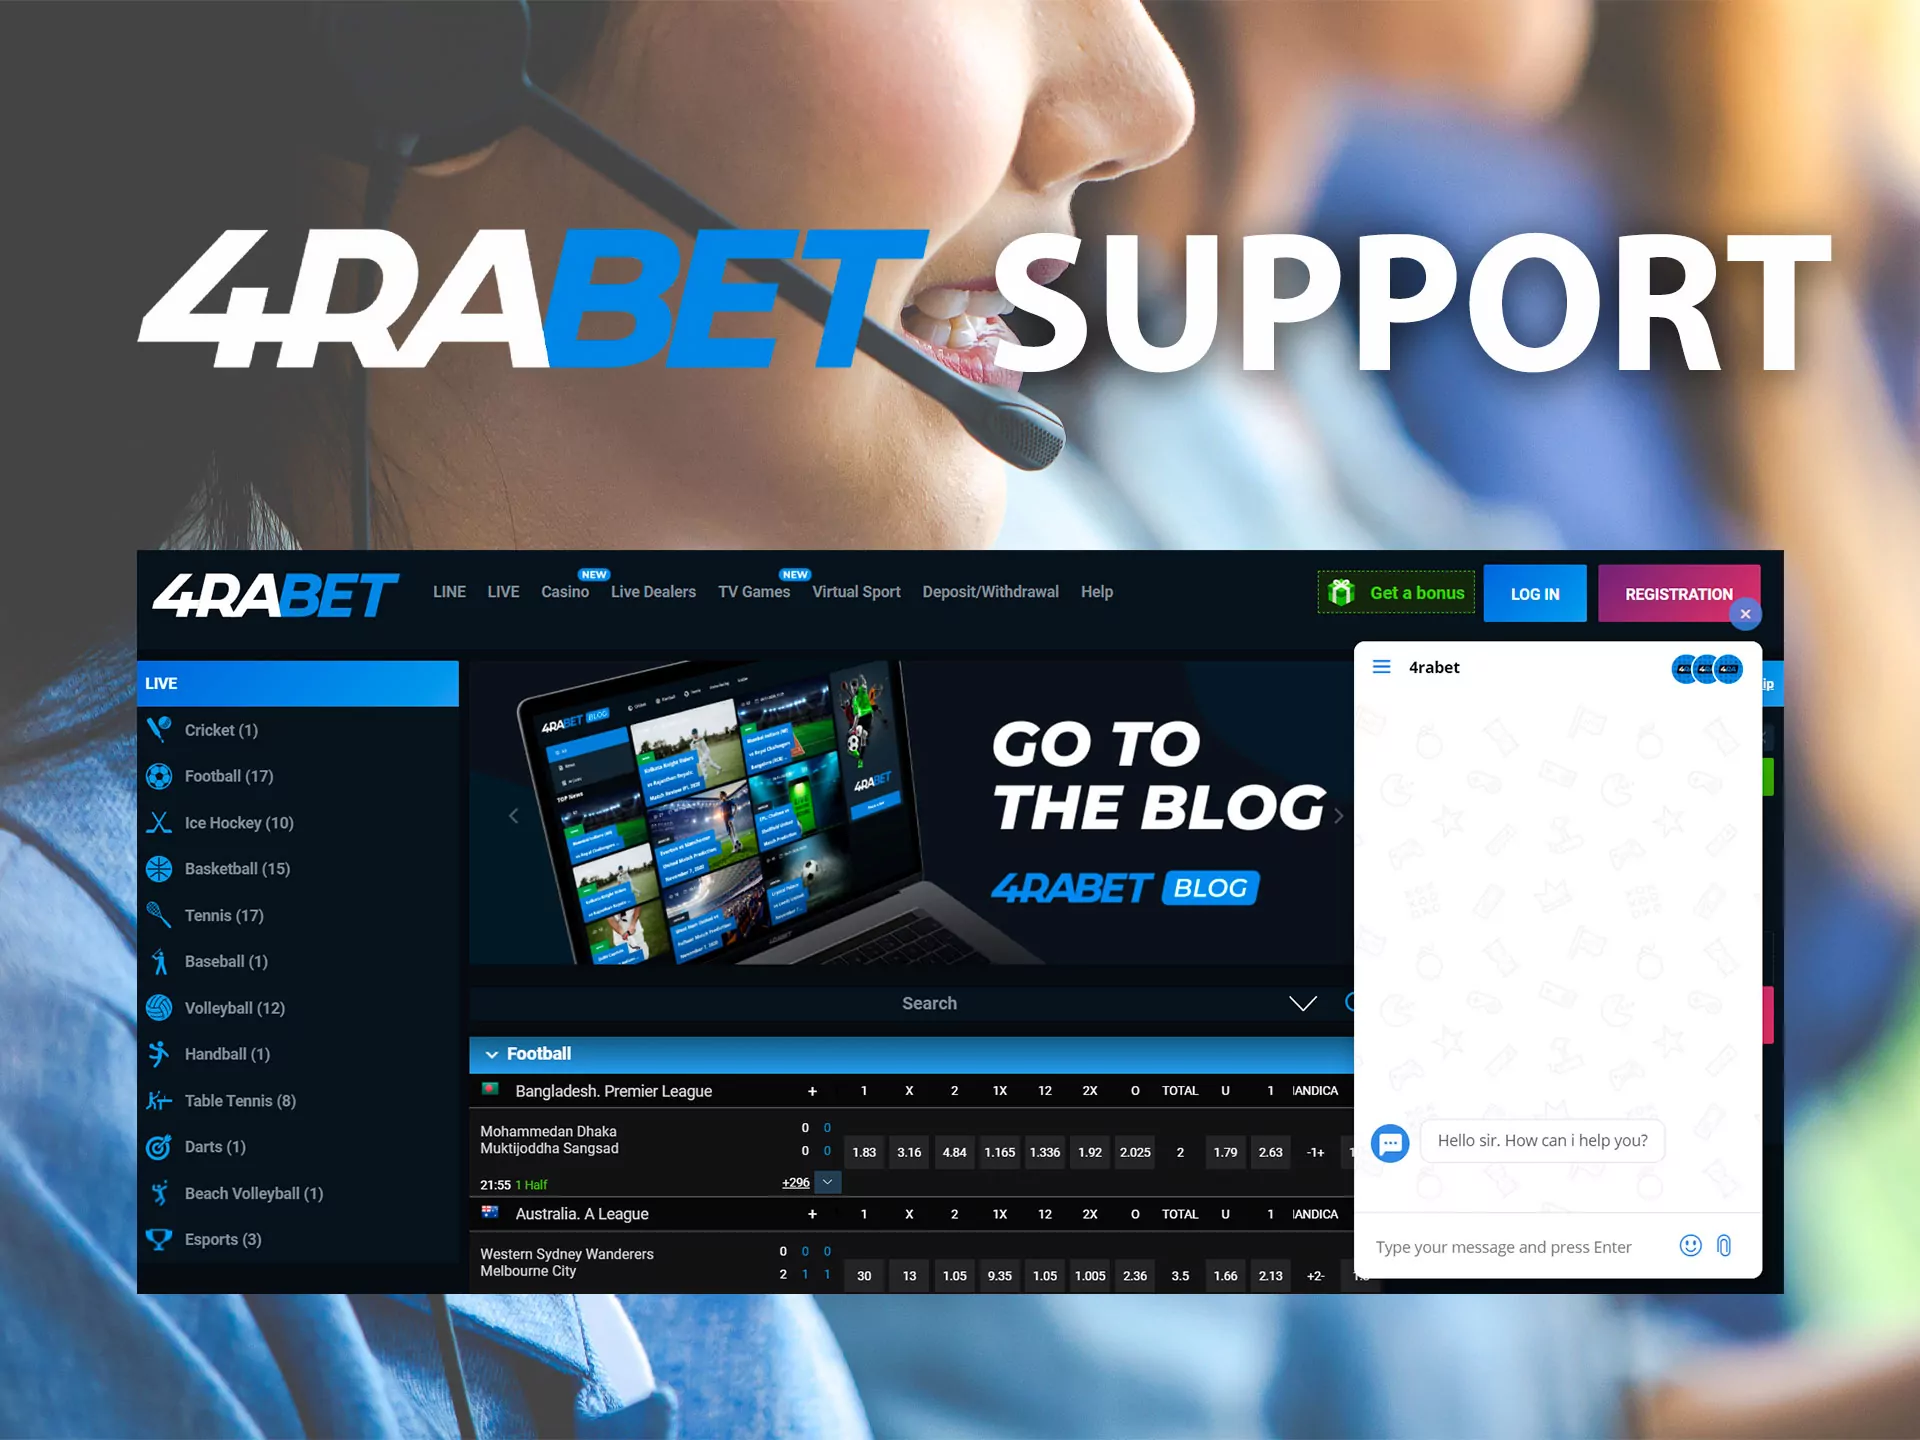 4rabet's 24/7 support team will answer any question about sports betting.